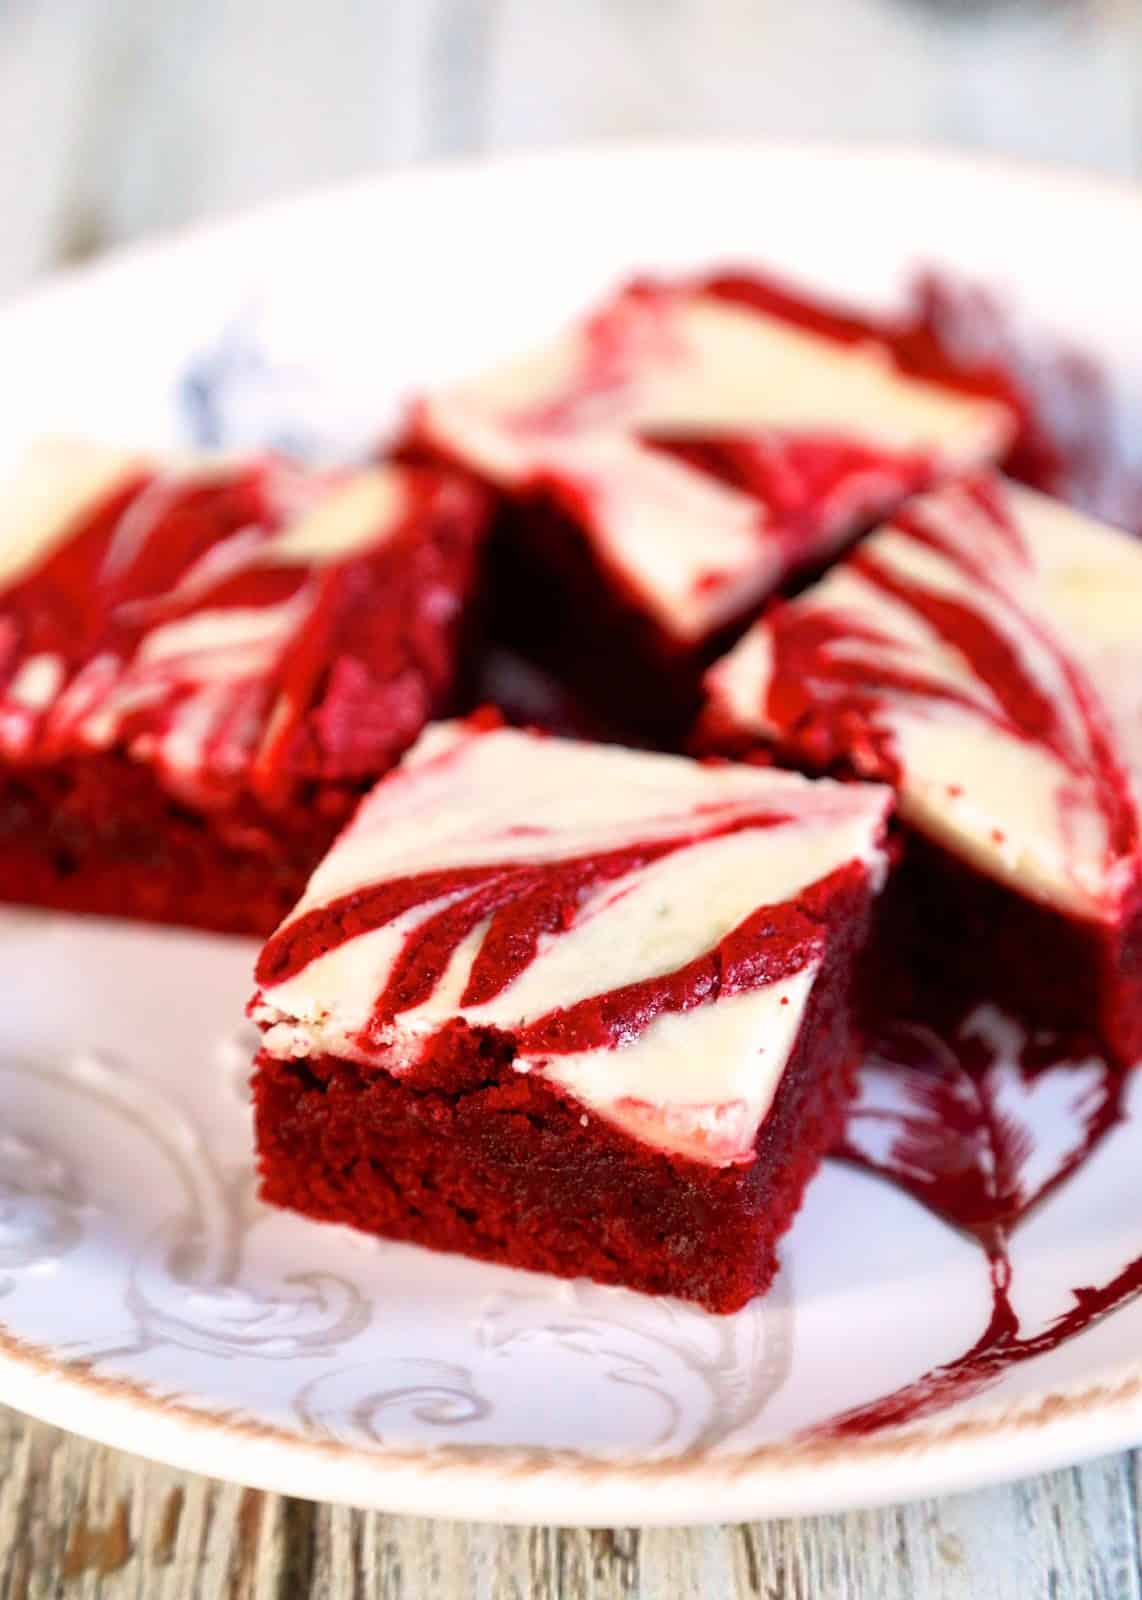 Red Velvet Cheesecake Brownies - homemade red velvet brownies with cheesecake swirled in the batter. All of my favorite desserts combined into one amazing recipe! These are SO good!!! Makes a great homemade gift.  Perfect ending to you holiday meal. We love this red velvet brownie recipe!